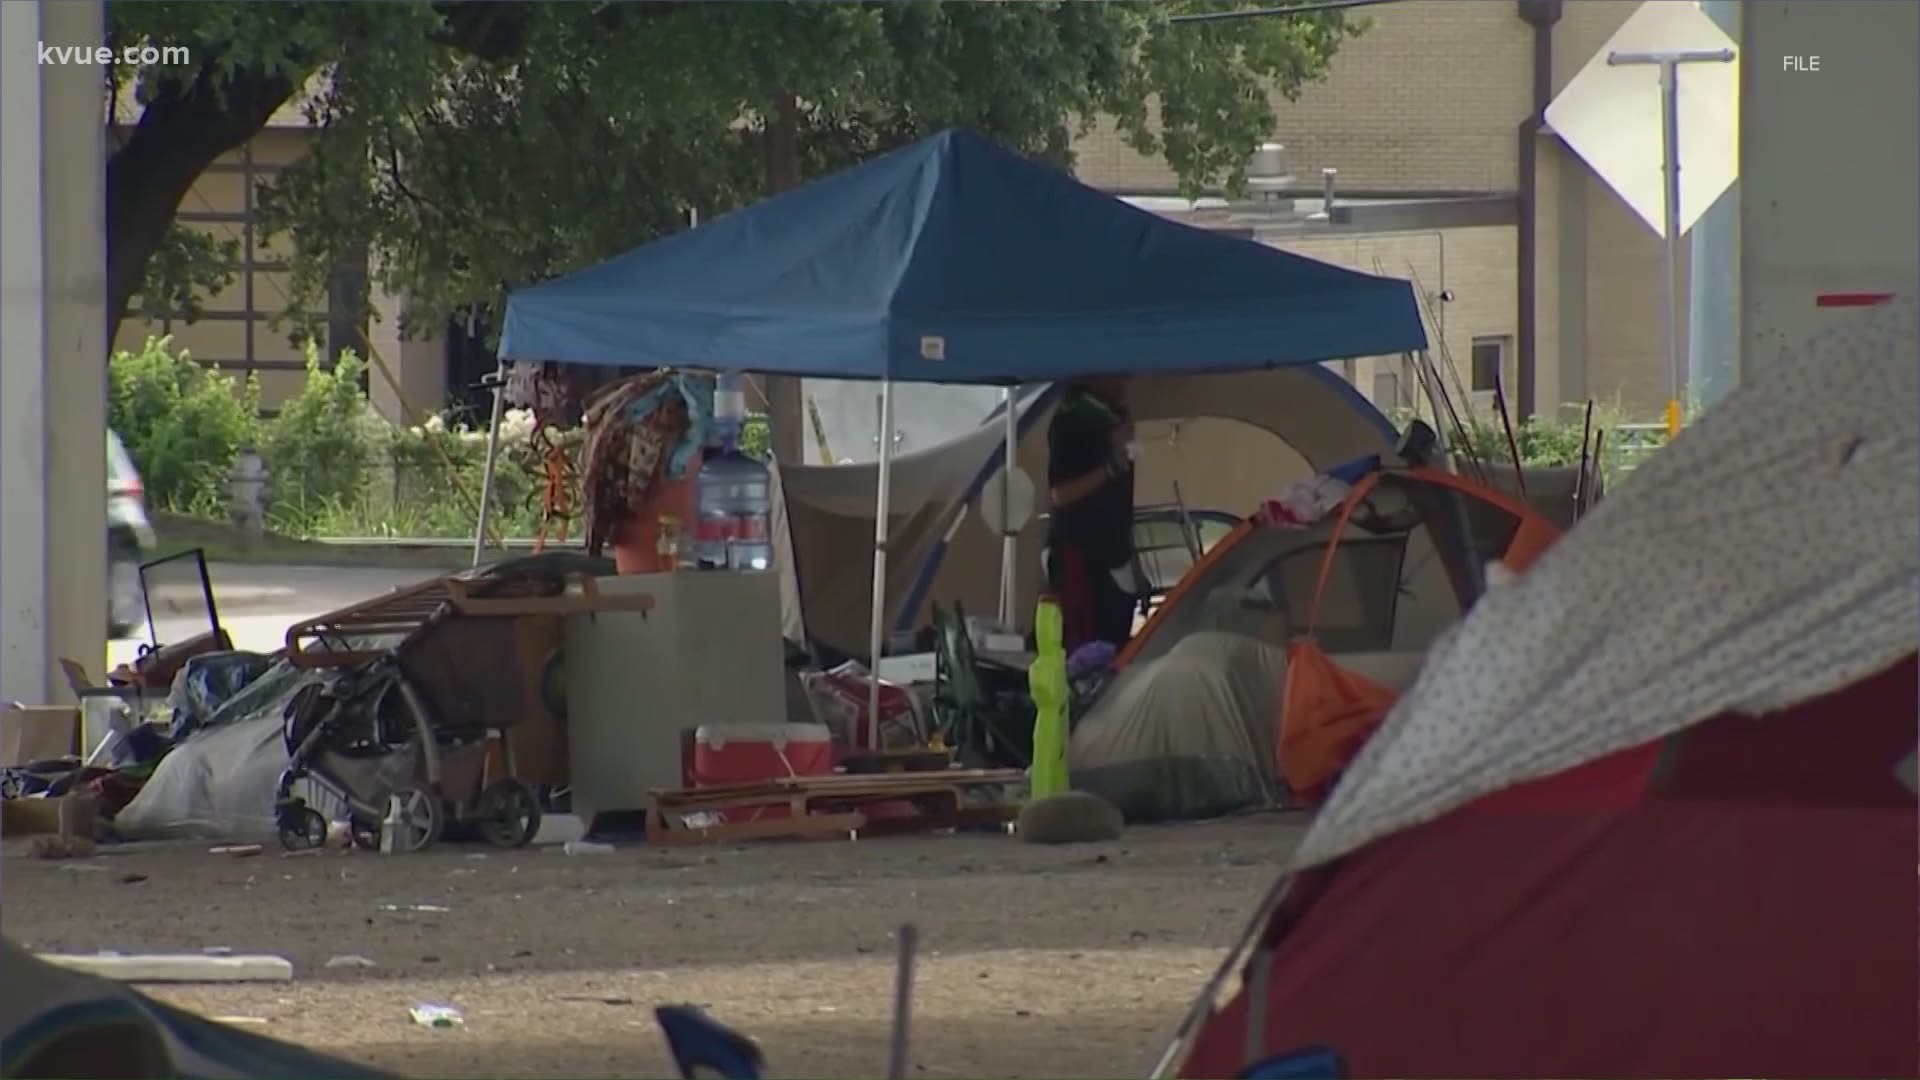 One big proposition on the ballot in Travis County is the proposed public camping ban, also known as Prop B. People on both sides are making final pleas to voters.